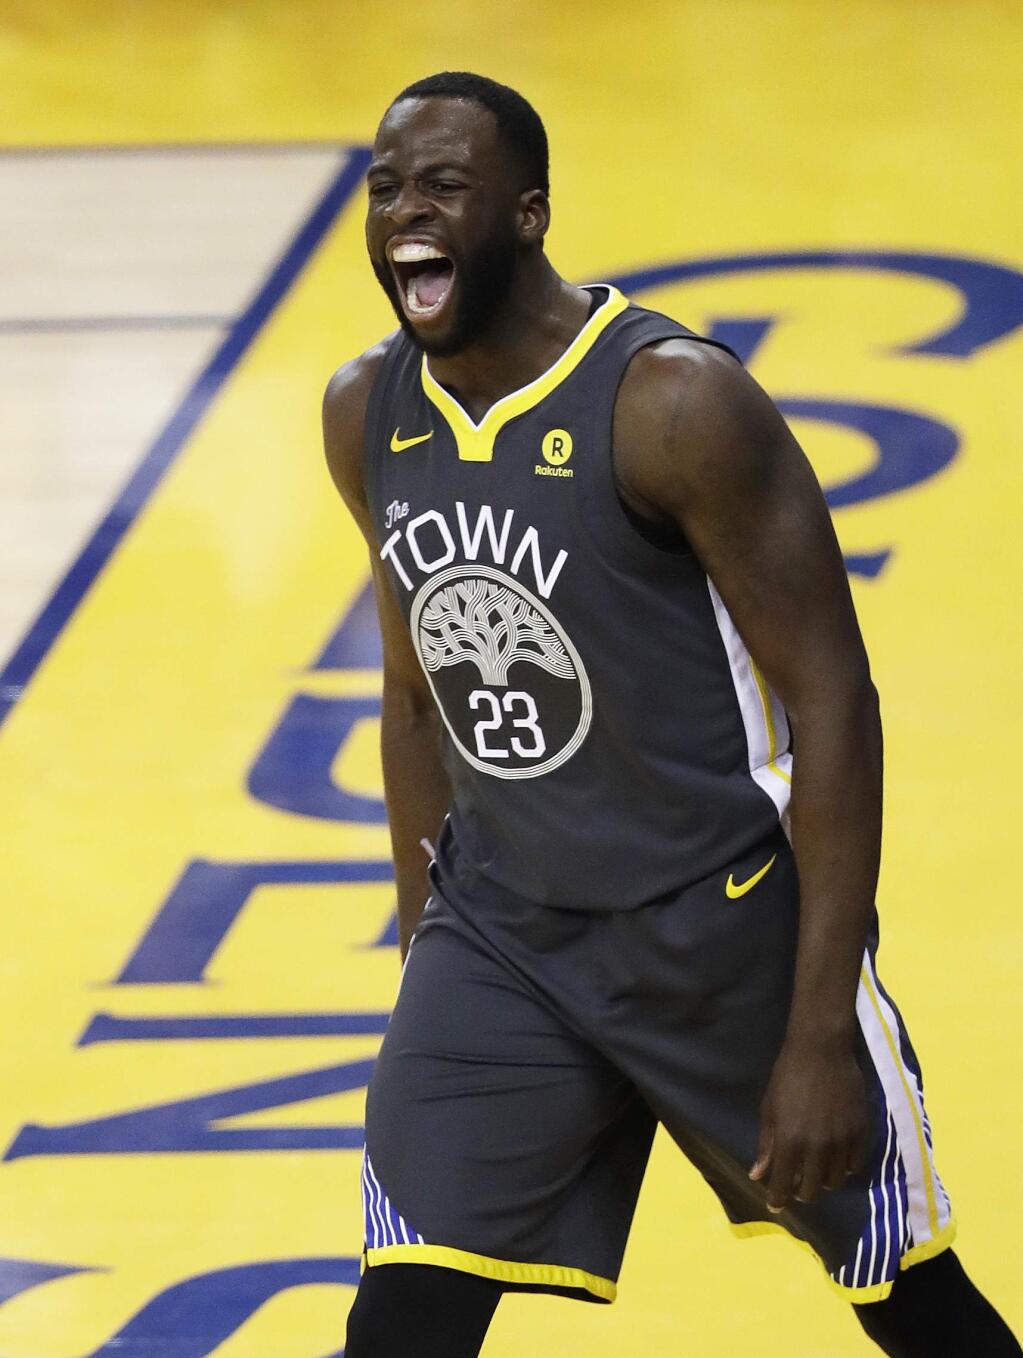 Golden State Warriors forward Draymond Green celebrates after scoring against the Cleveland Cavaliers during the first half of Game 2 of the NBA Finals in Oakland, Sunday, June 3, 2018. (AP Photo/Marcio Jose Sanchez)